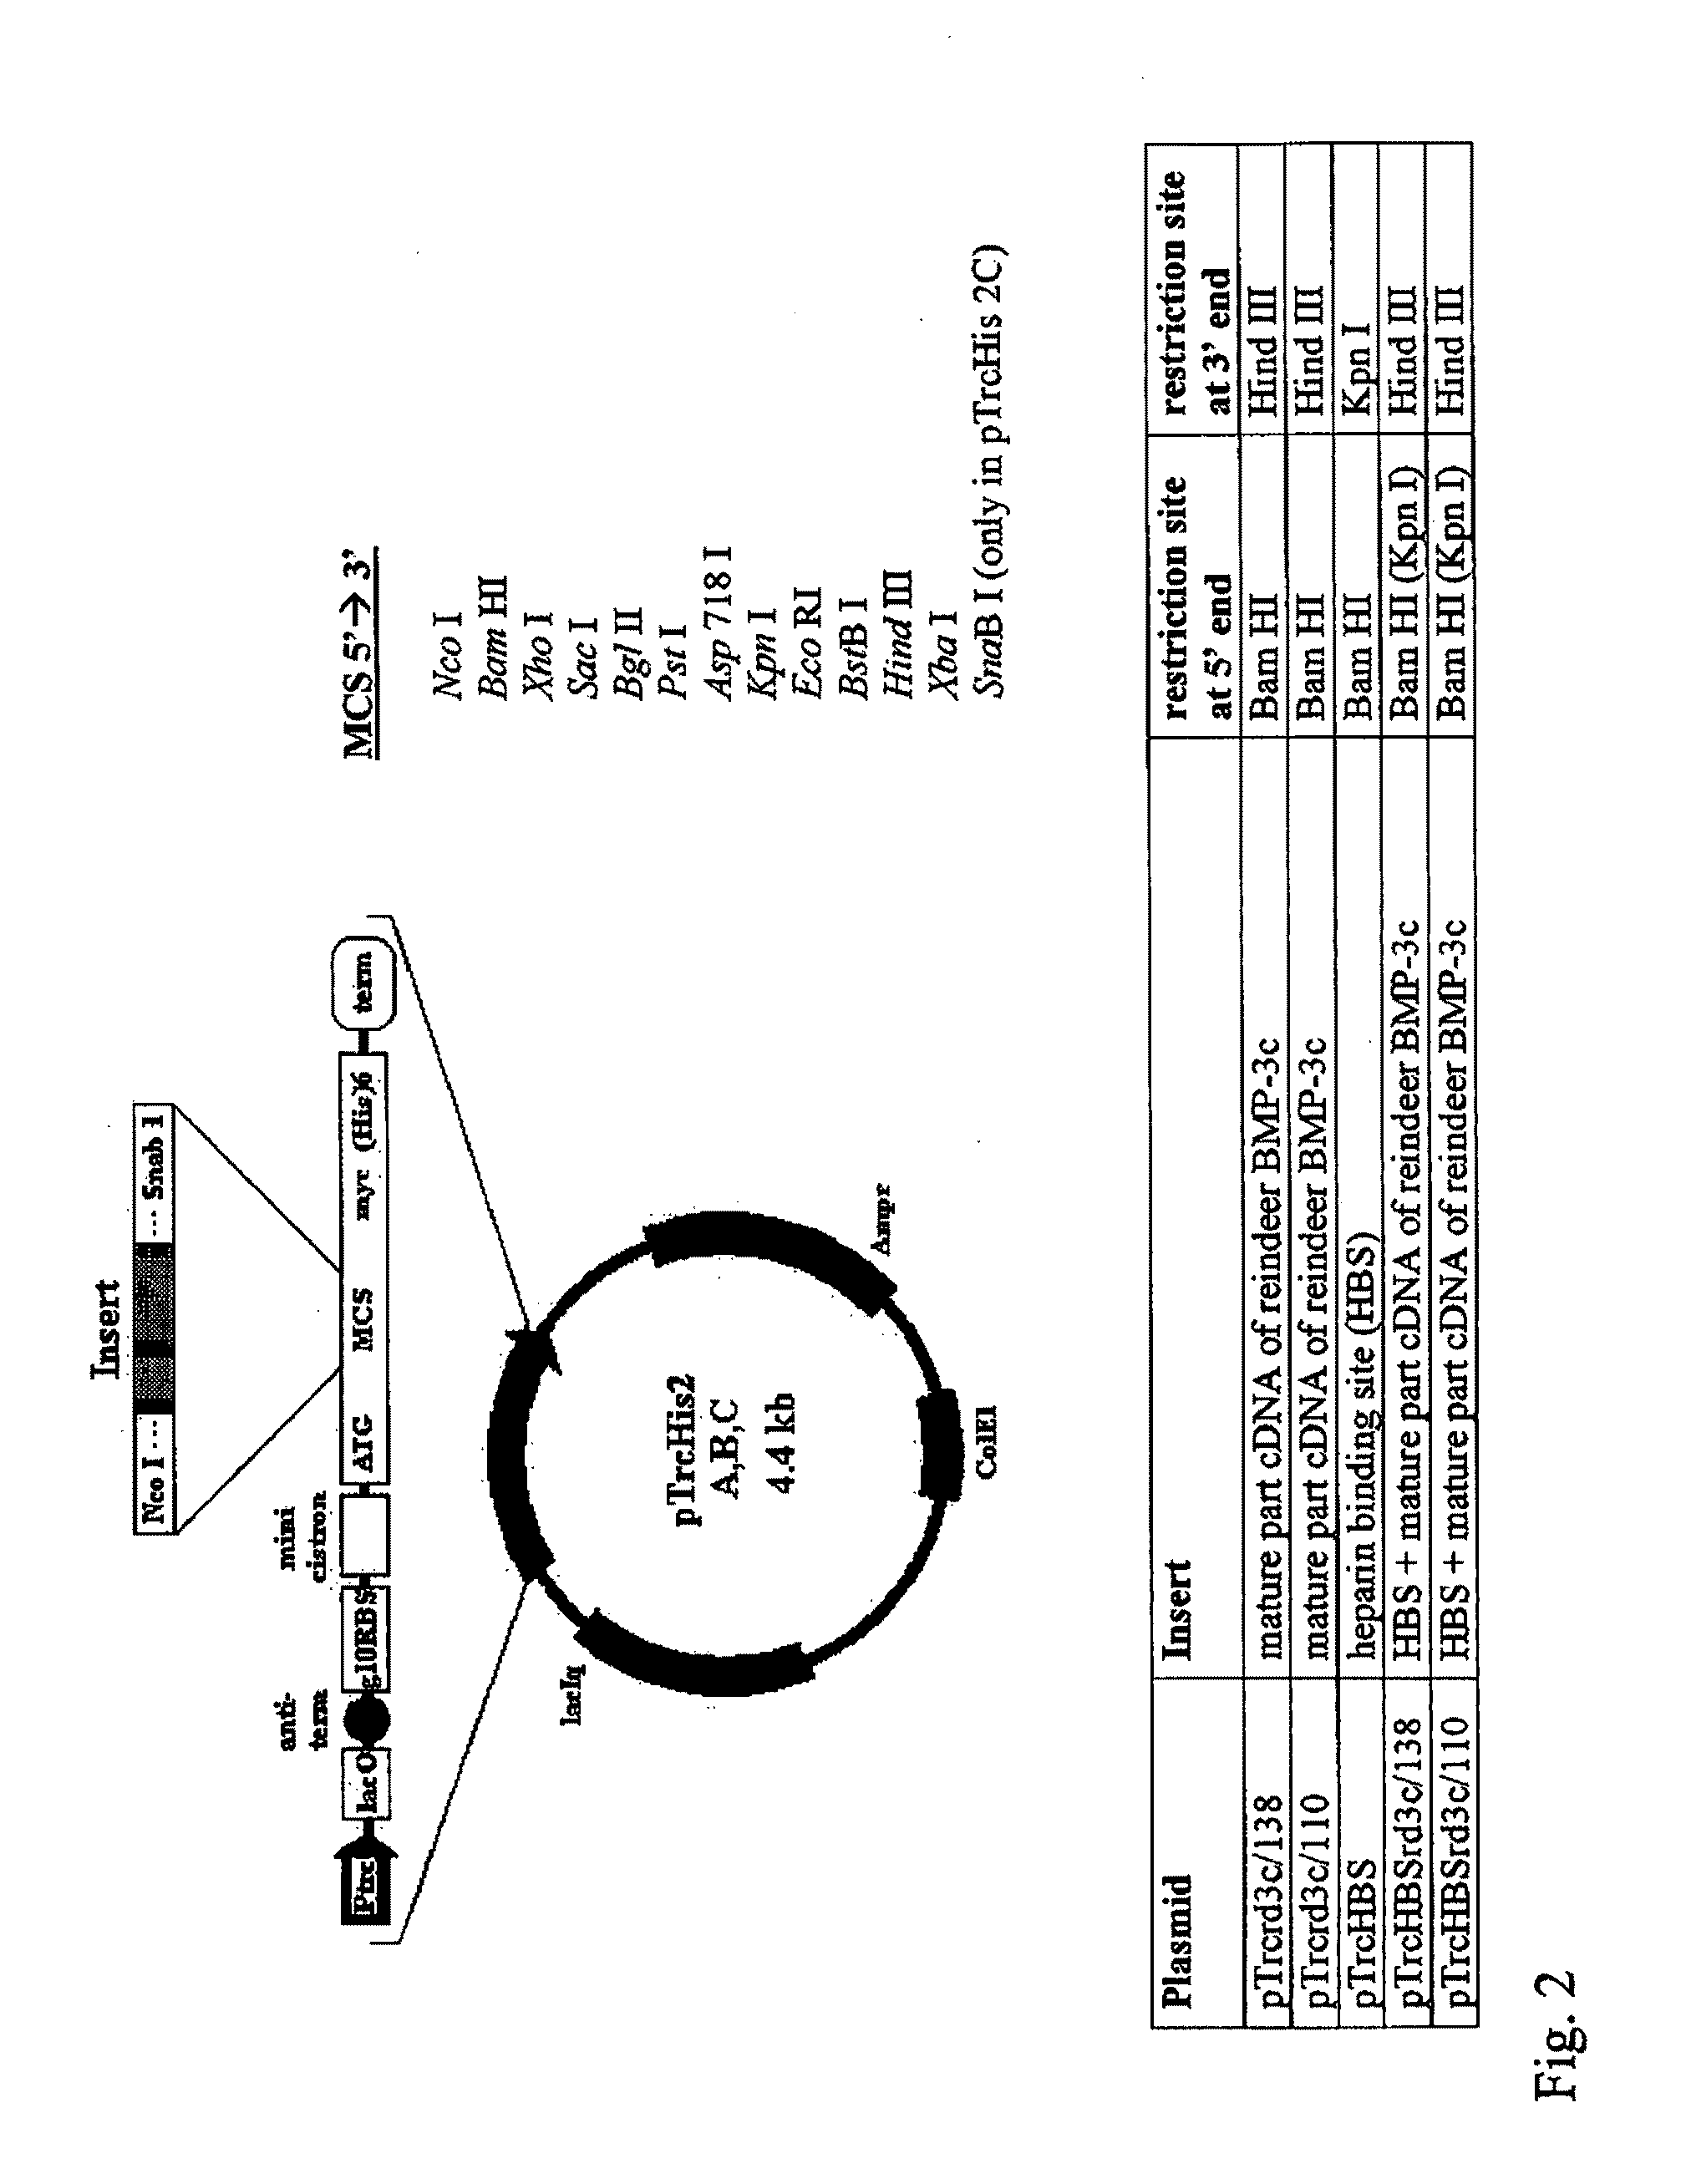 Bone morphogenetic protein 3 and osteogenic devices and pharmaceutical products containing thereof